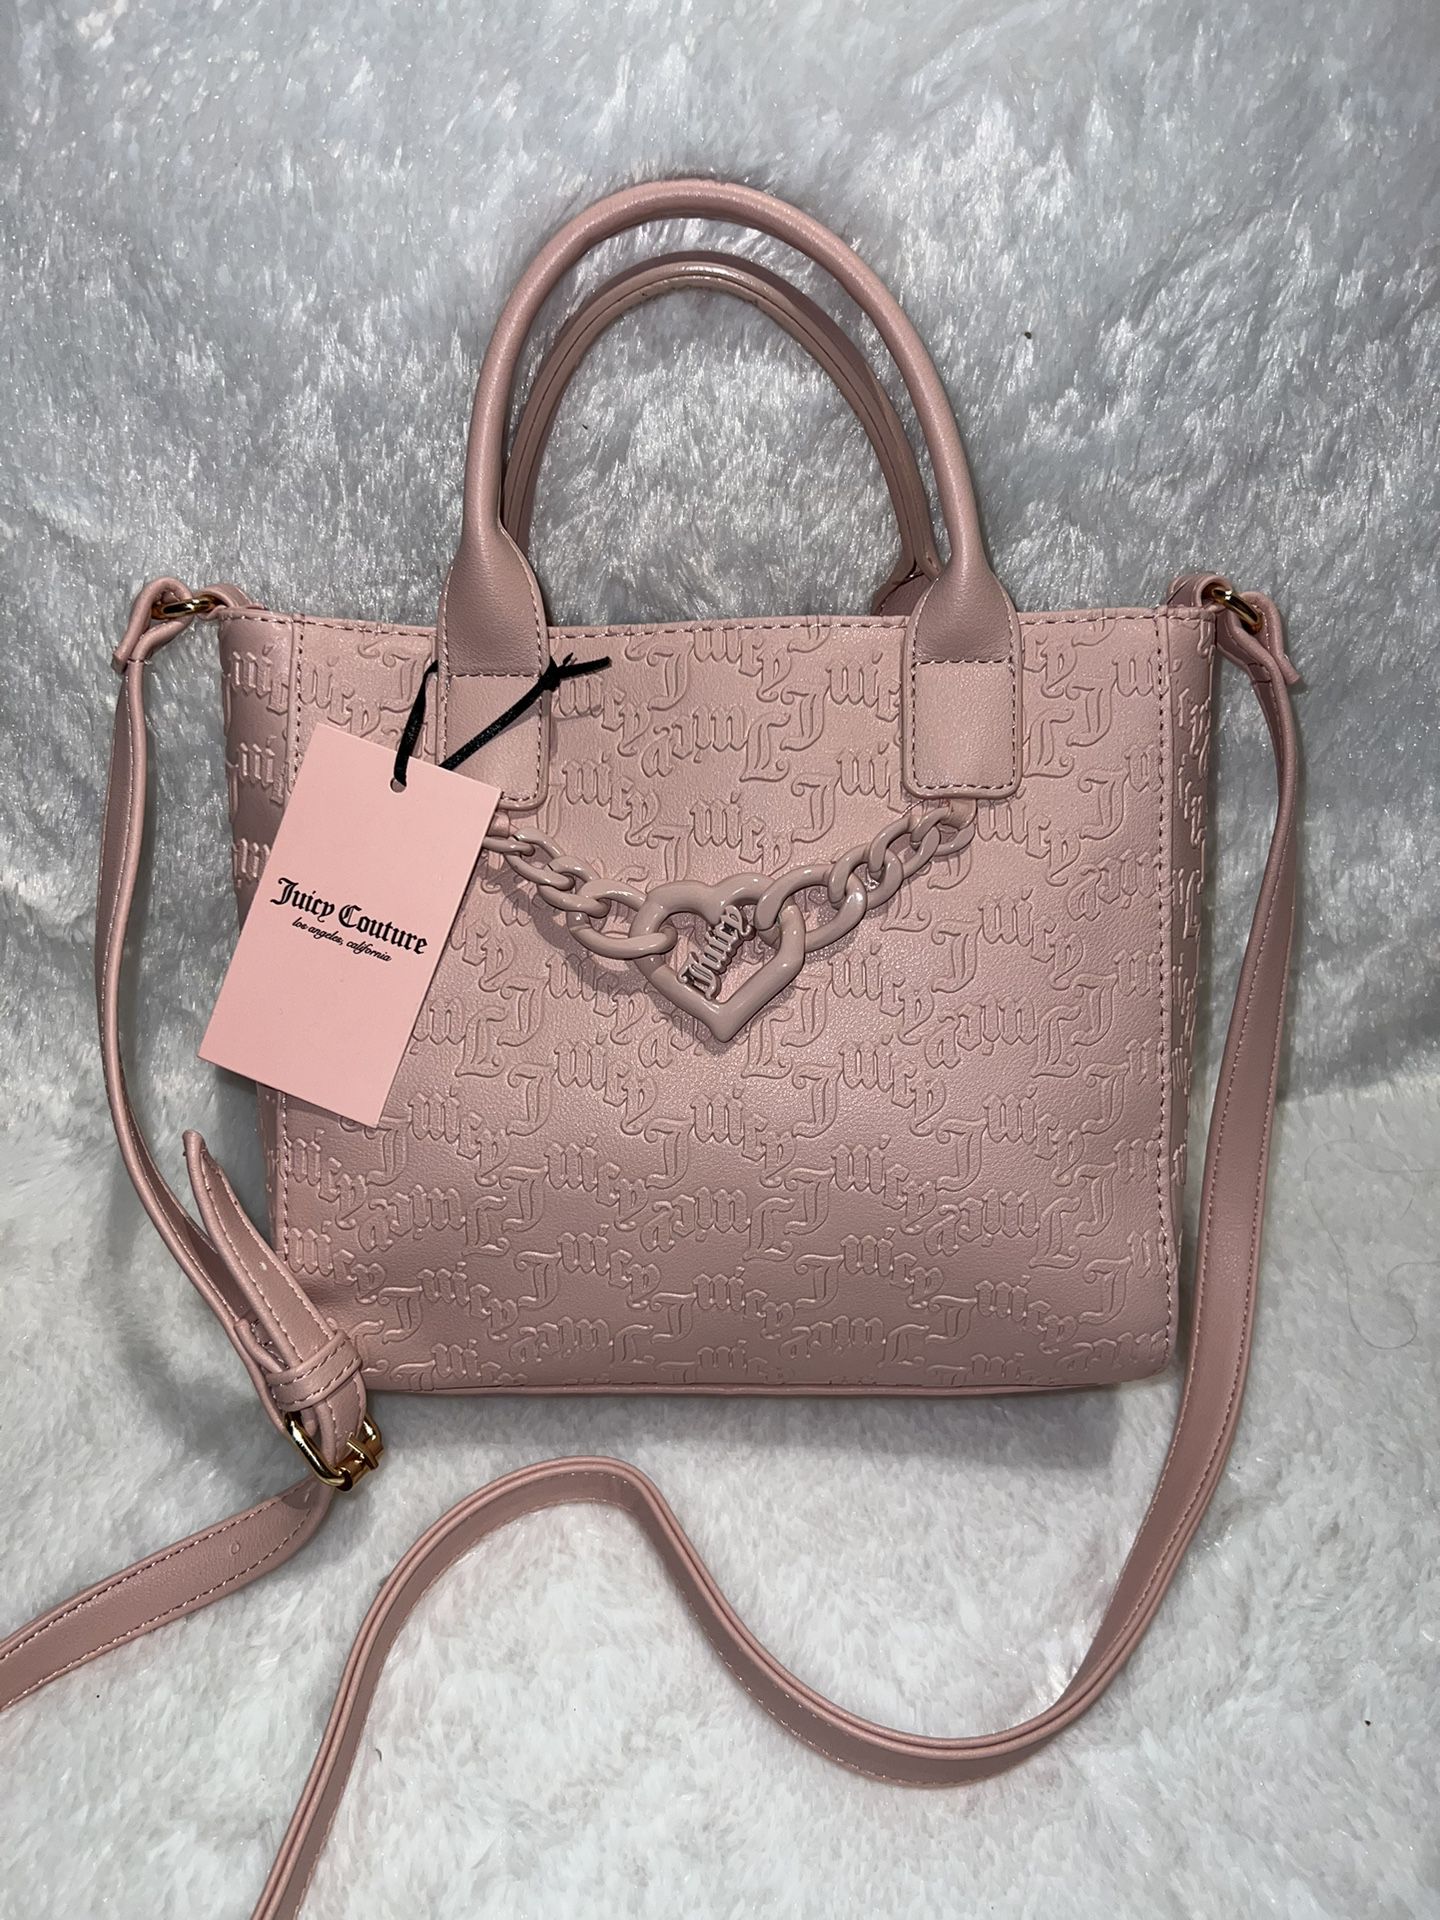 Juicy Couture Small Tote Bag 